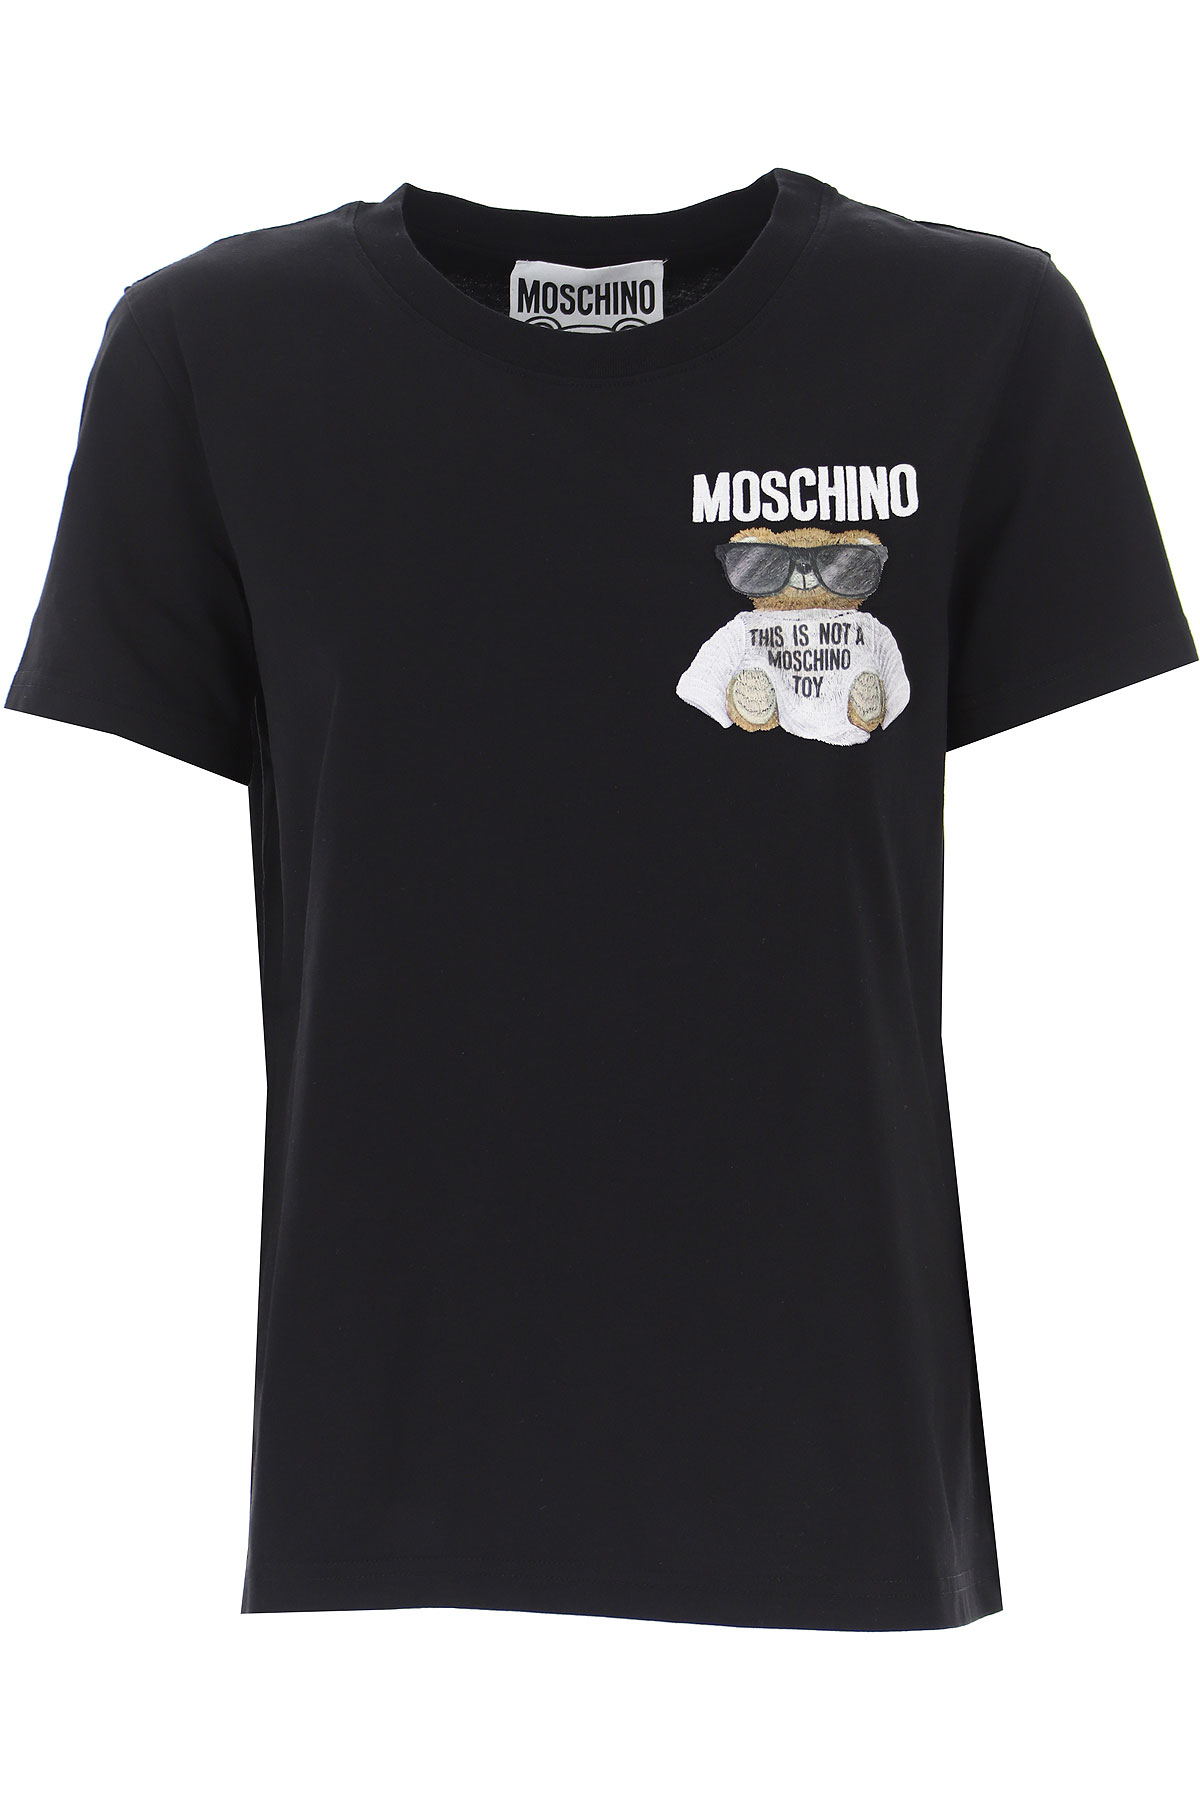 Moschino T-Shirt for Women On Sale 